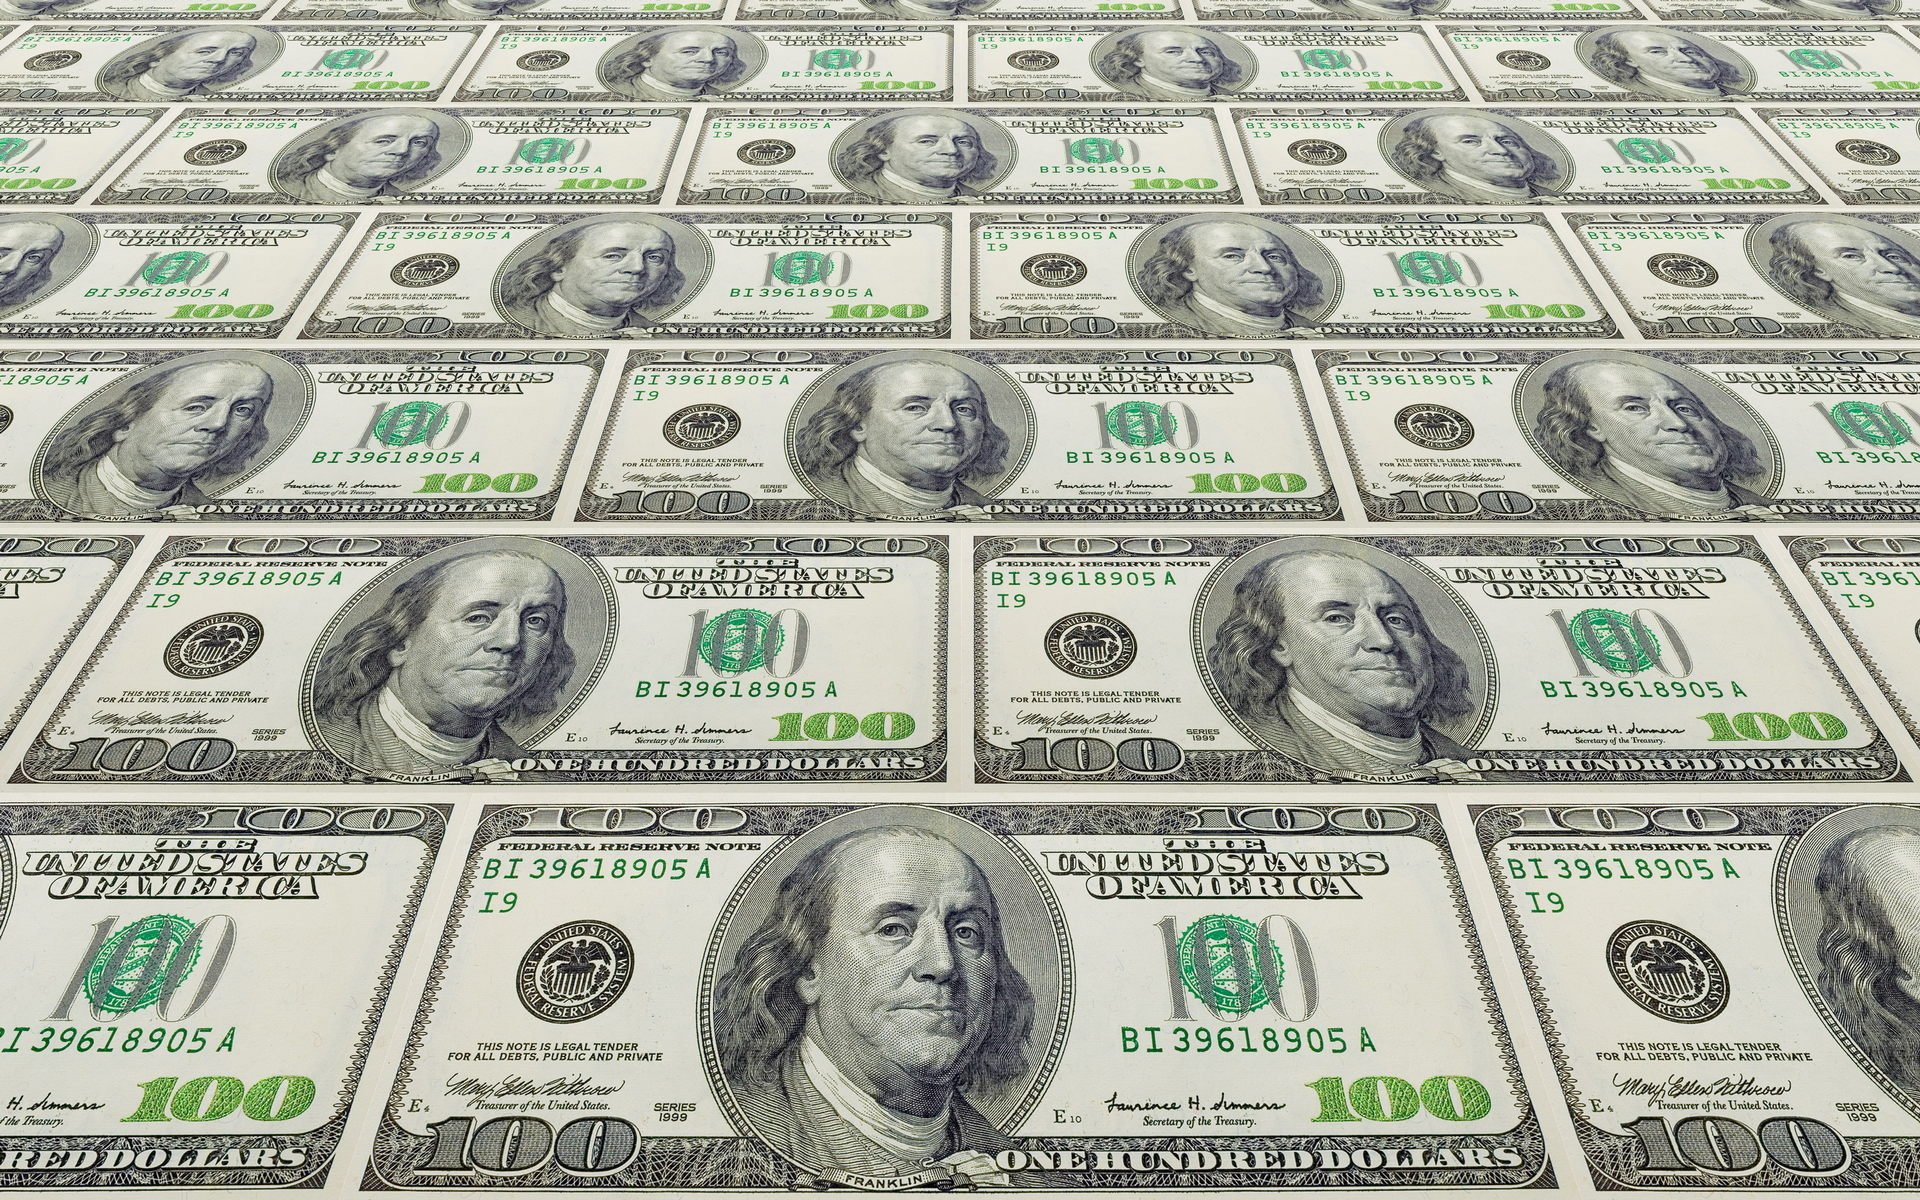 Download wallpaper money new dollars download photo wallpapers for